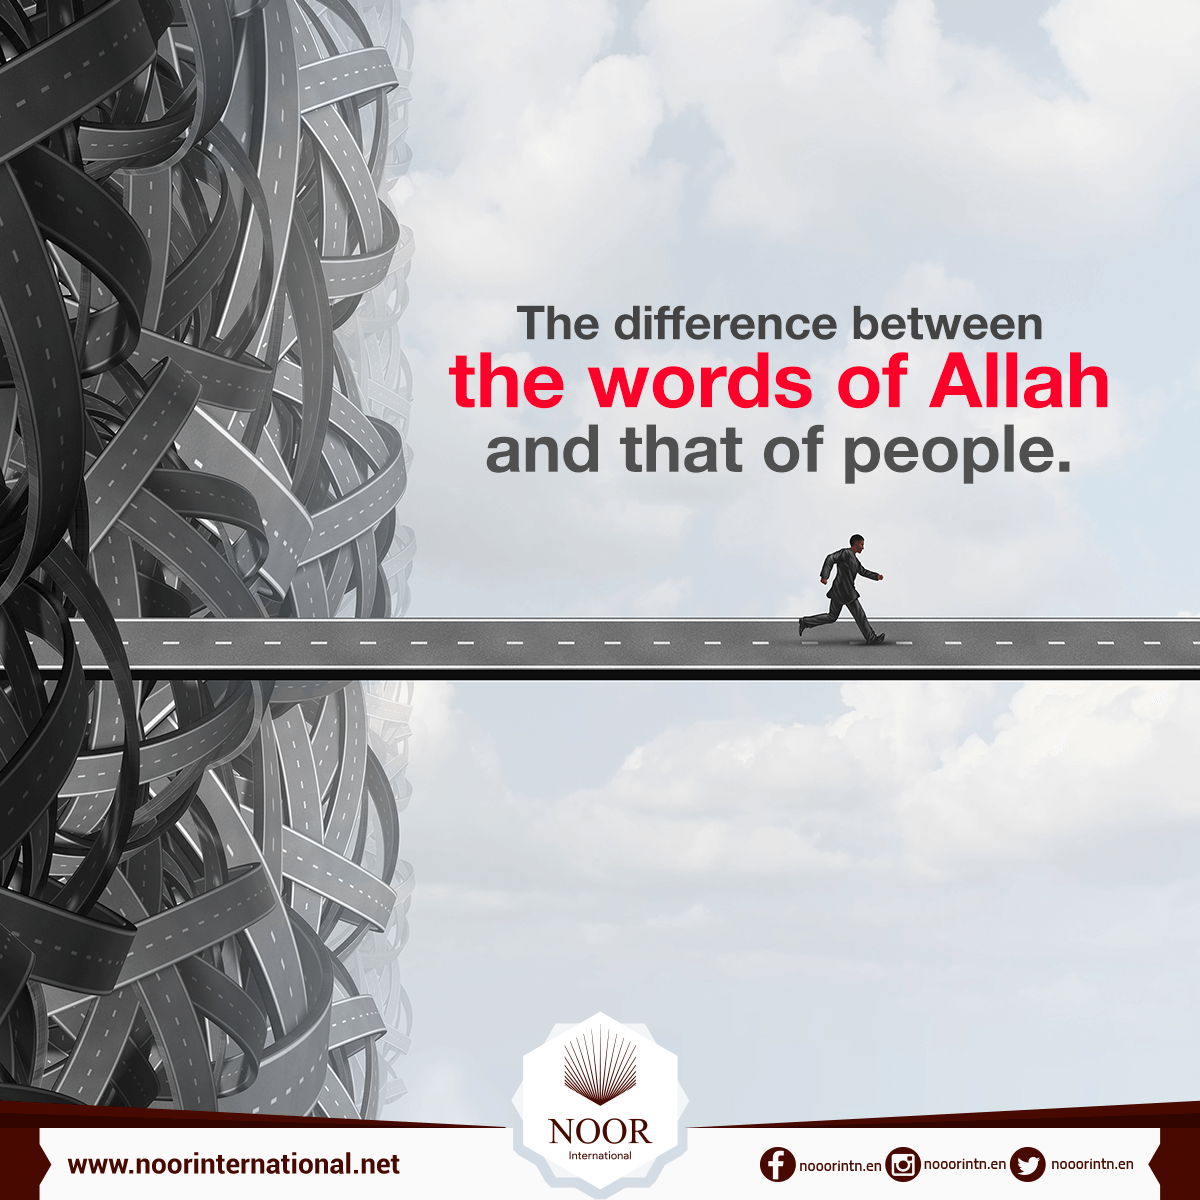 The difference between the words of Allah and that of people.